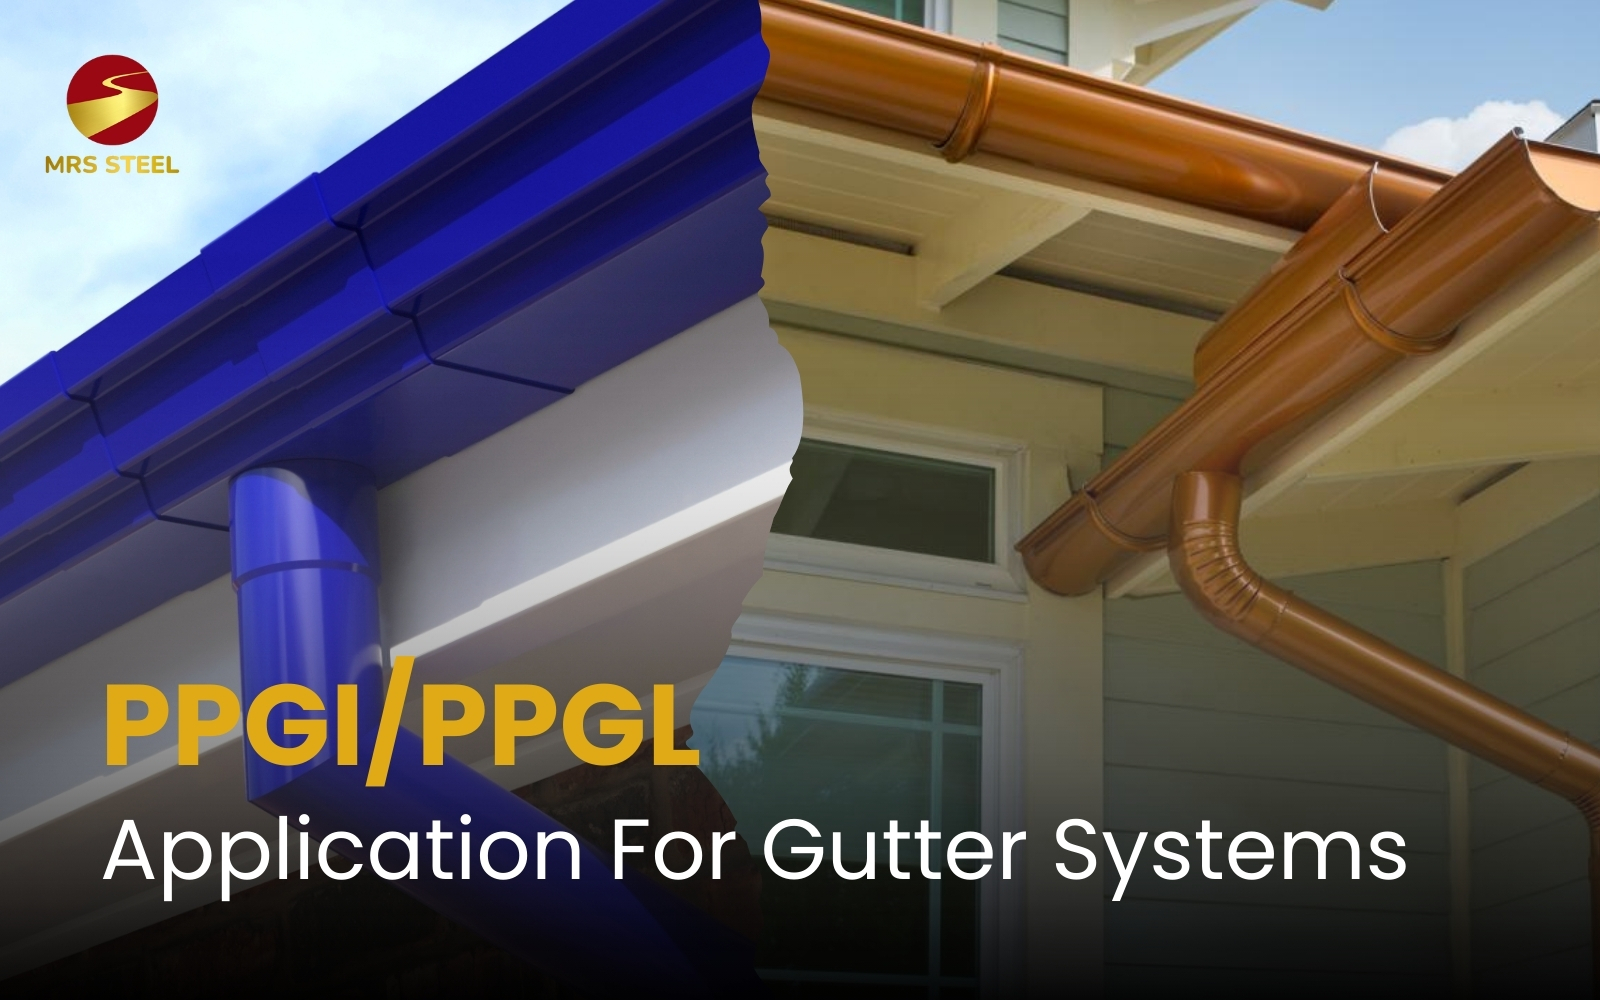 Application of PPGI/PPGL for gutter systems